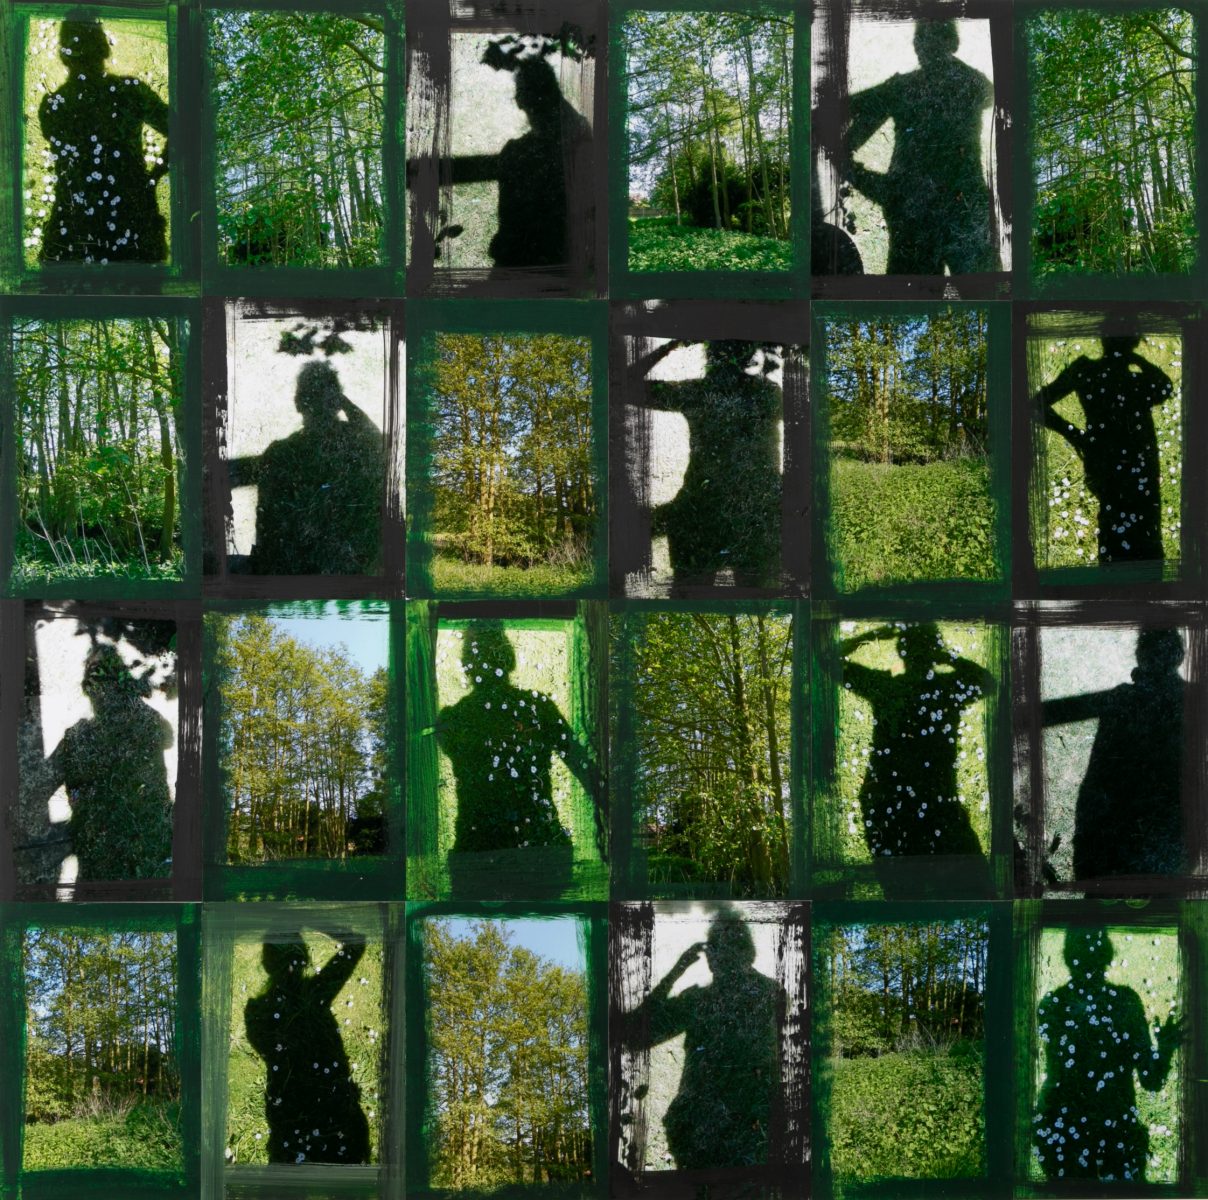 Shadows and Woodland with Green and Black